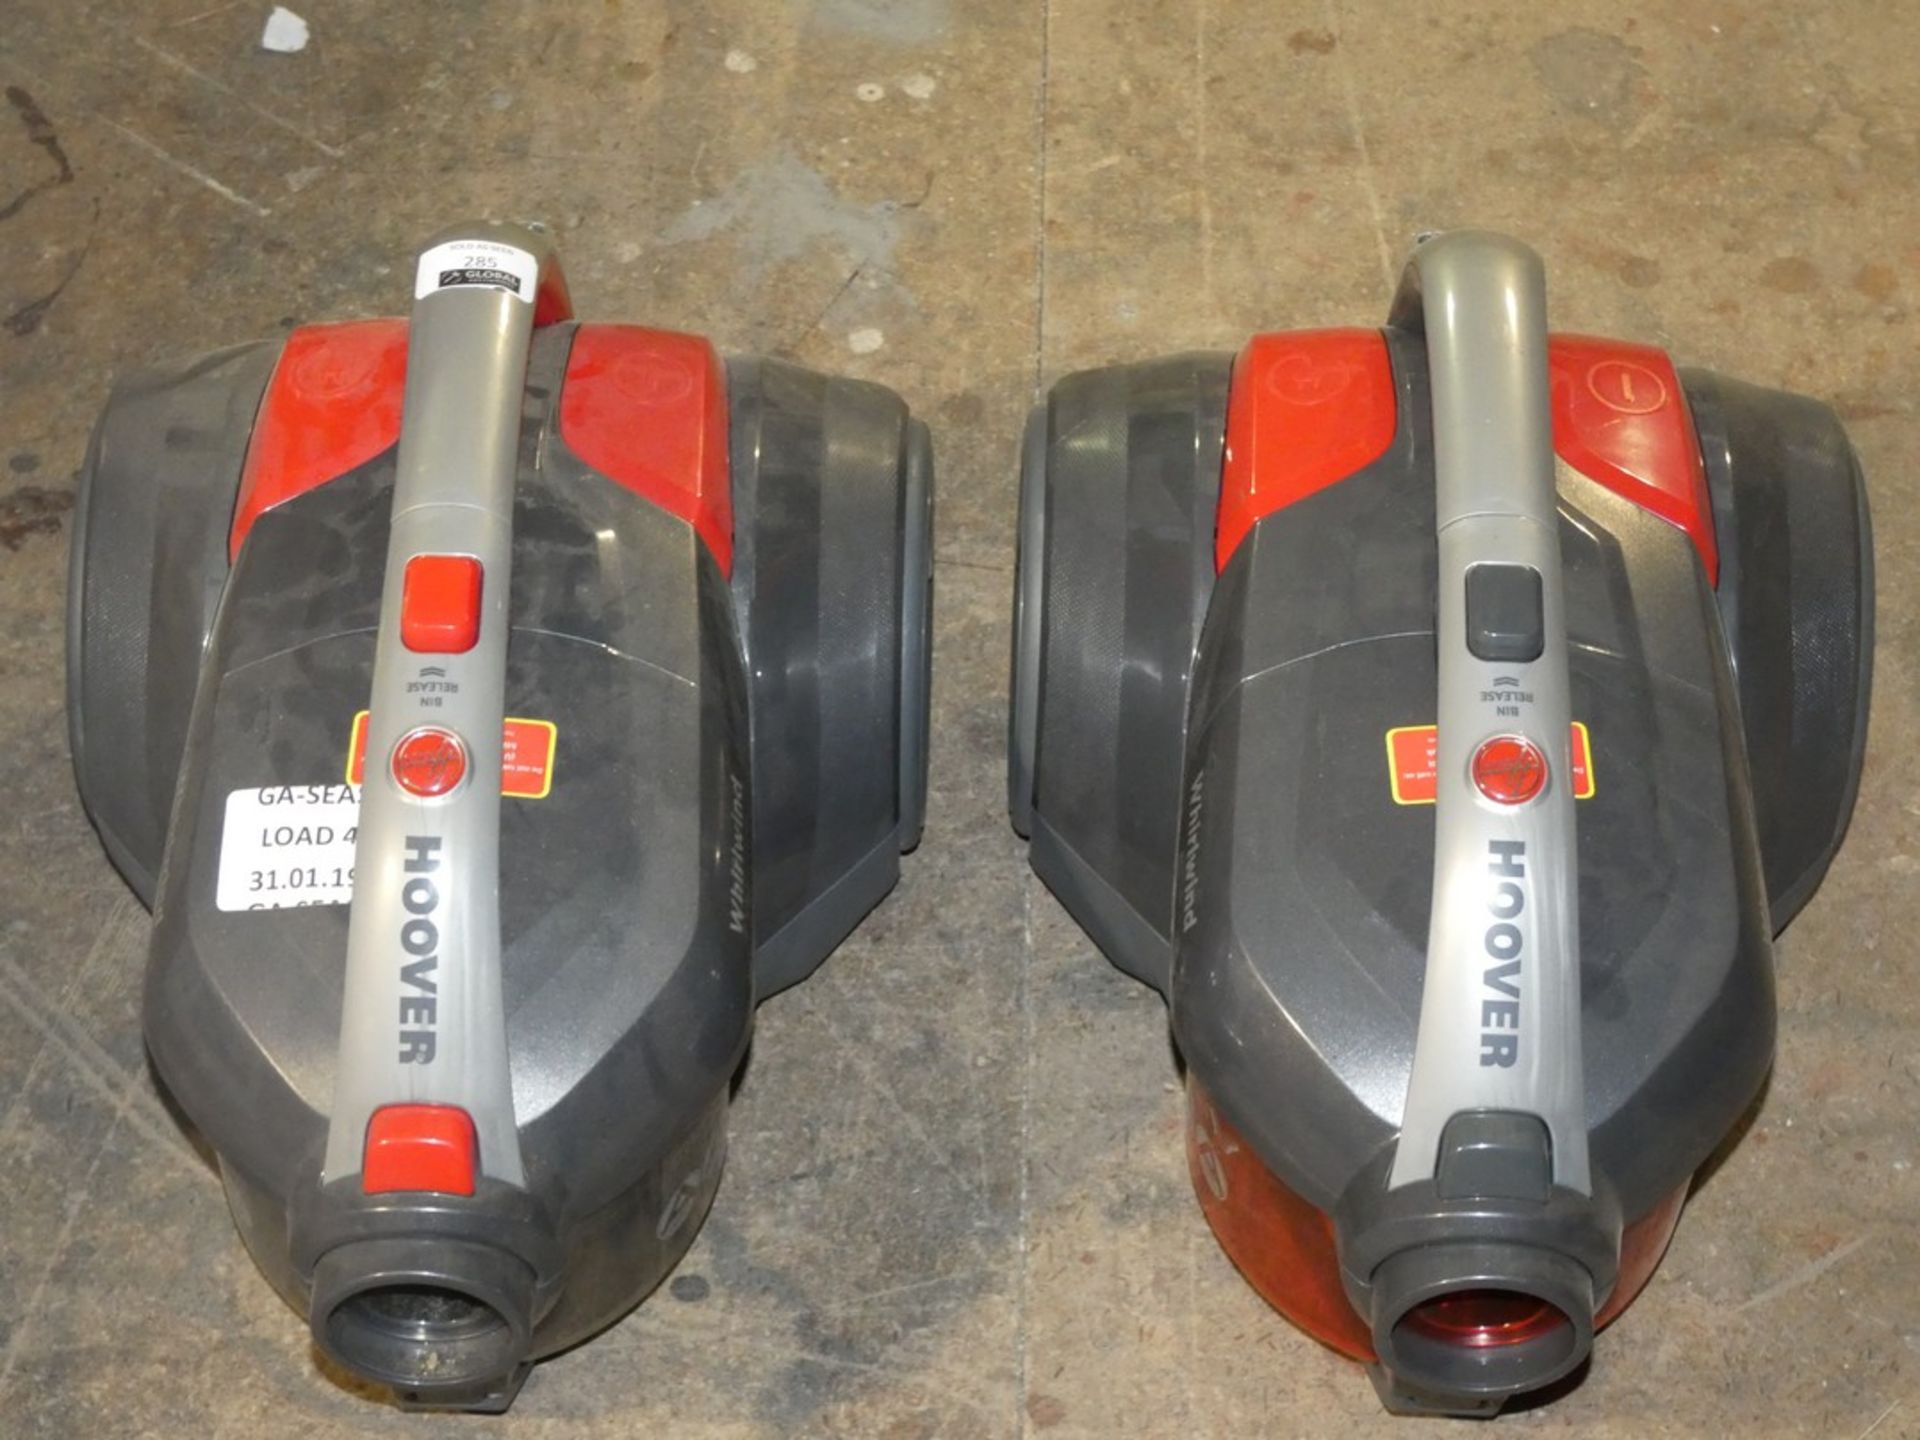 Hoover Cylinder Vacuum Cleaners with No Accessories